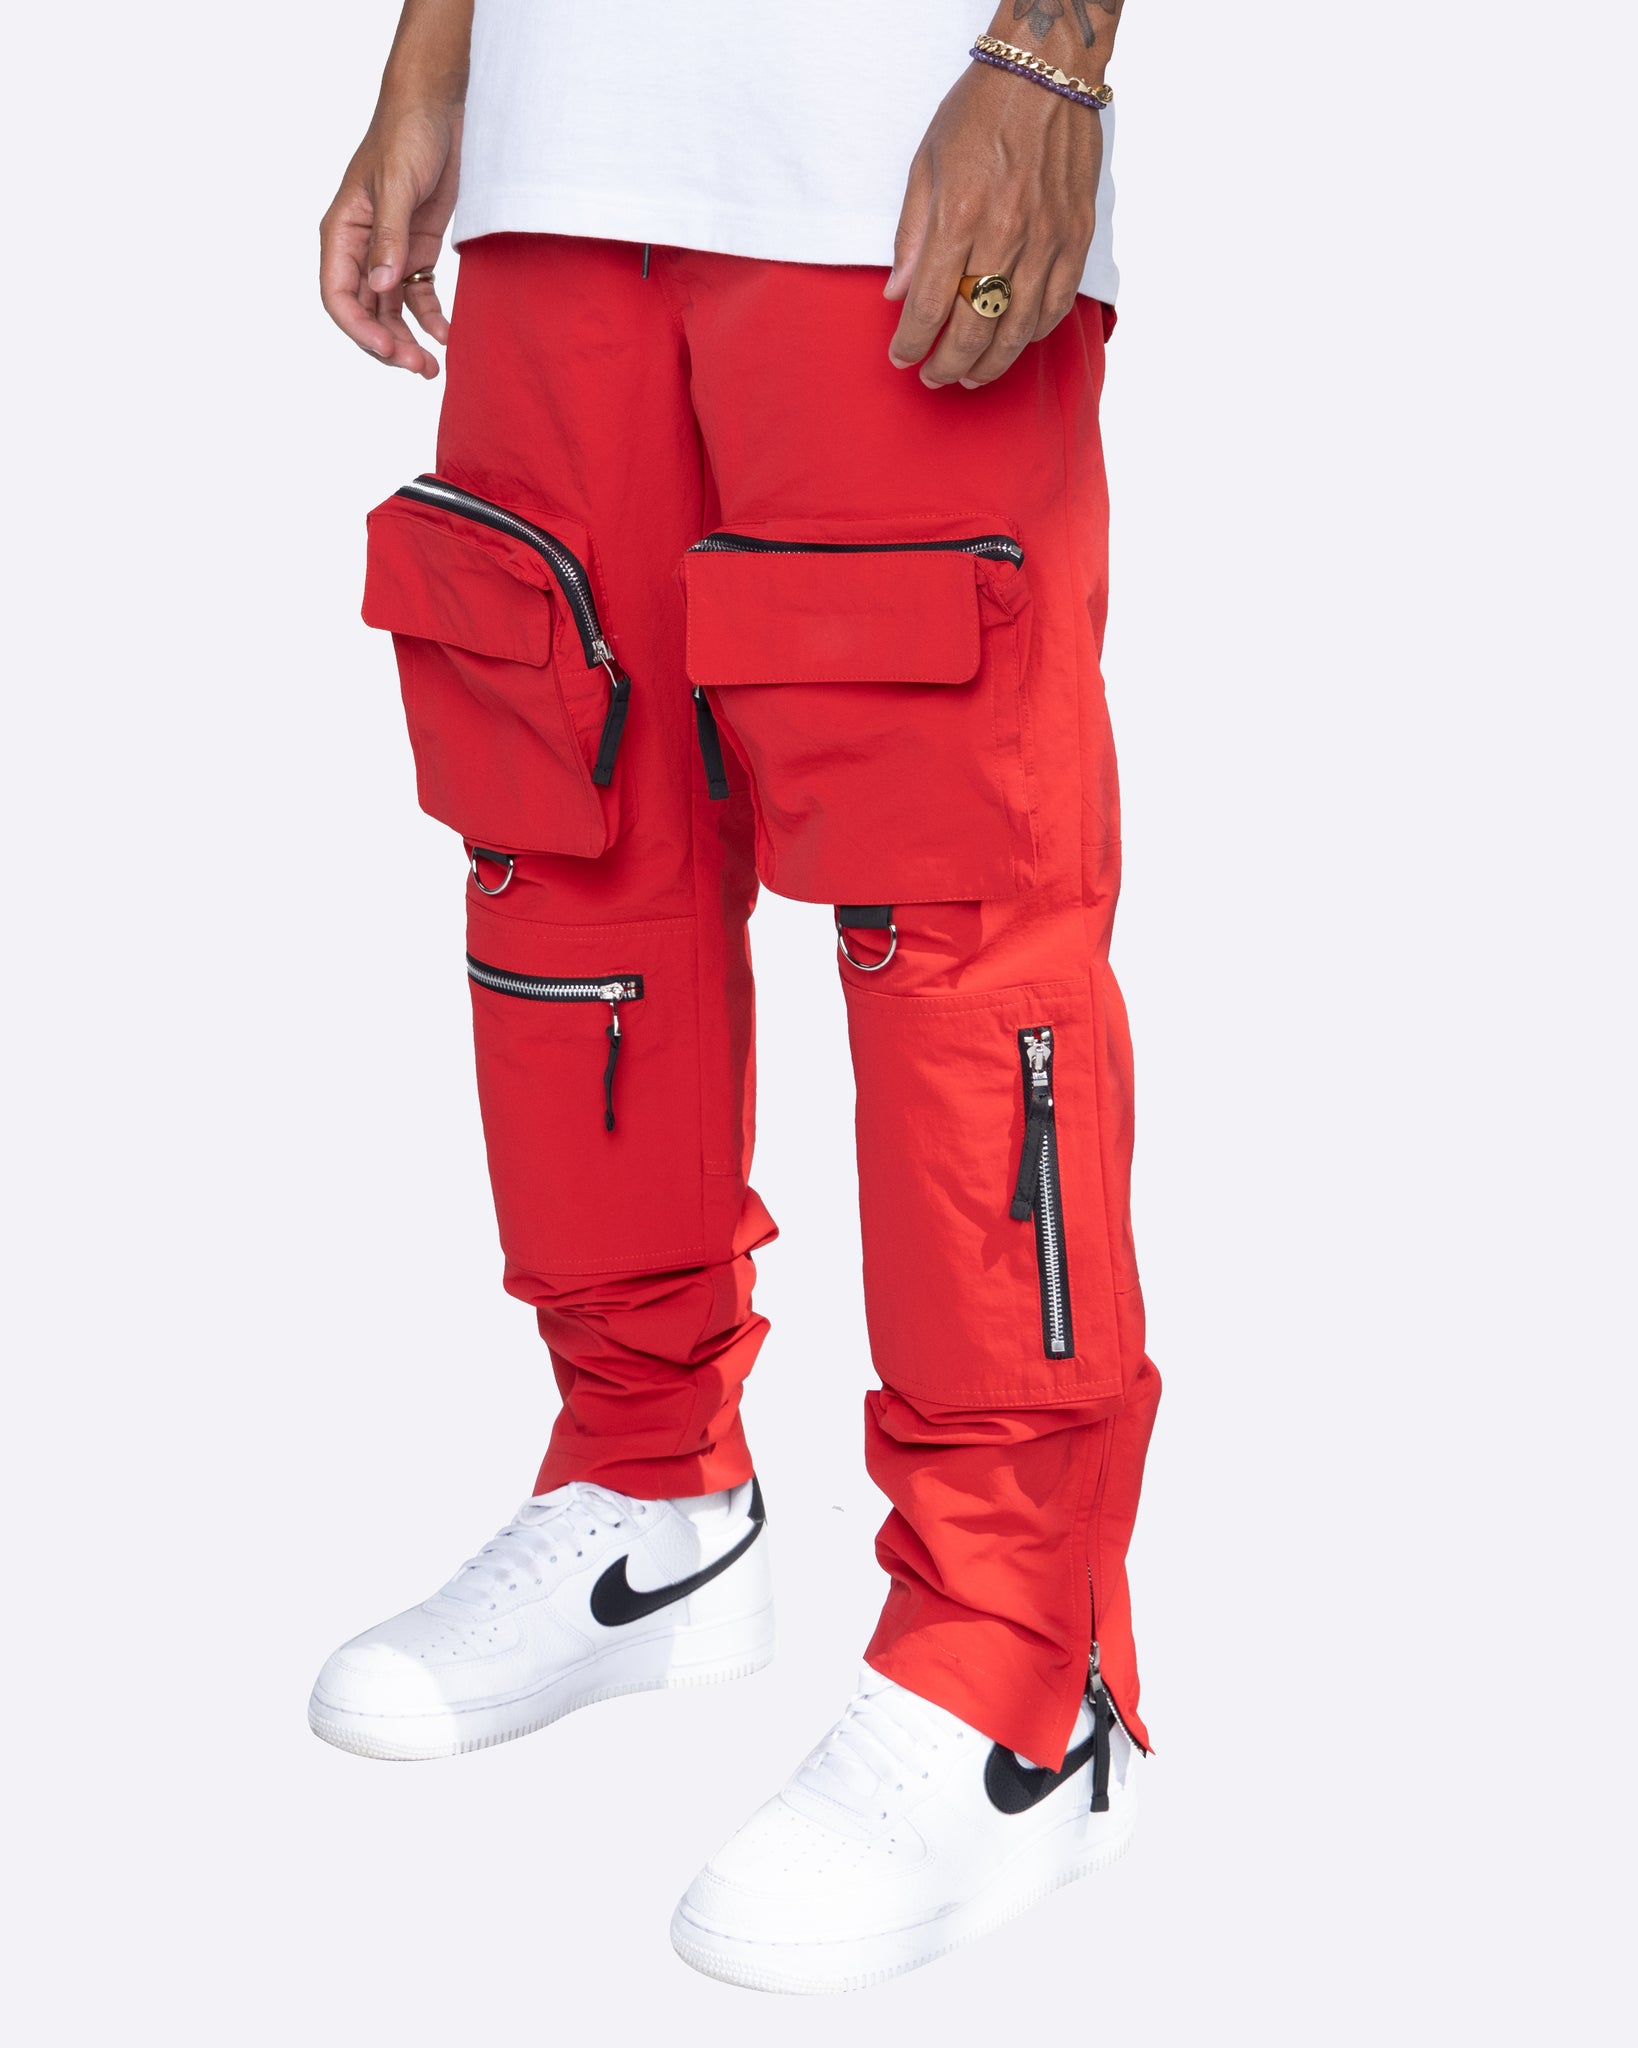 EPTM C4 CARGO PANTS-RED